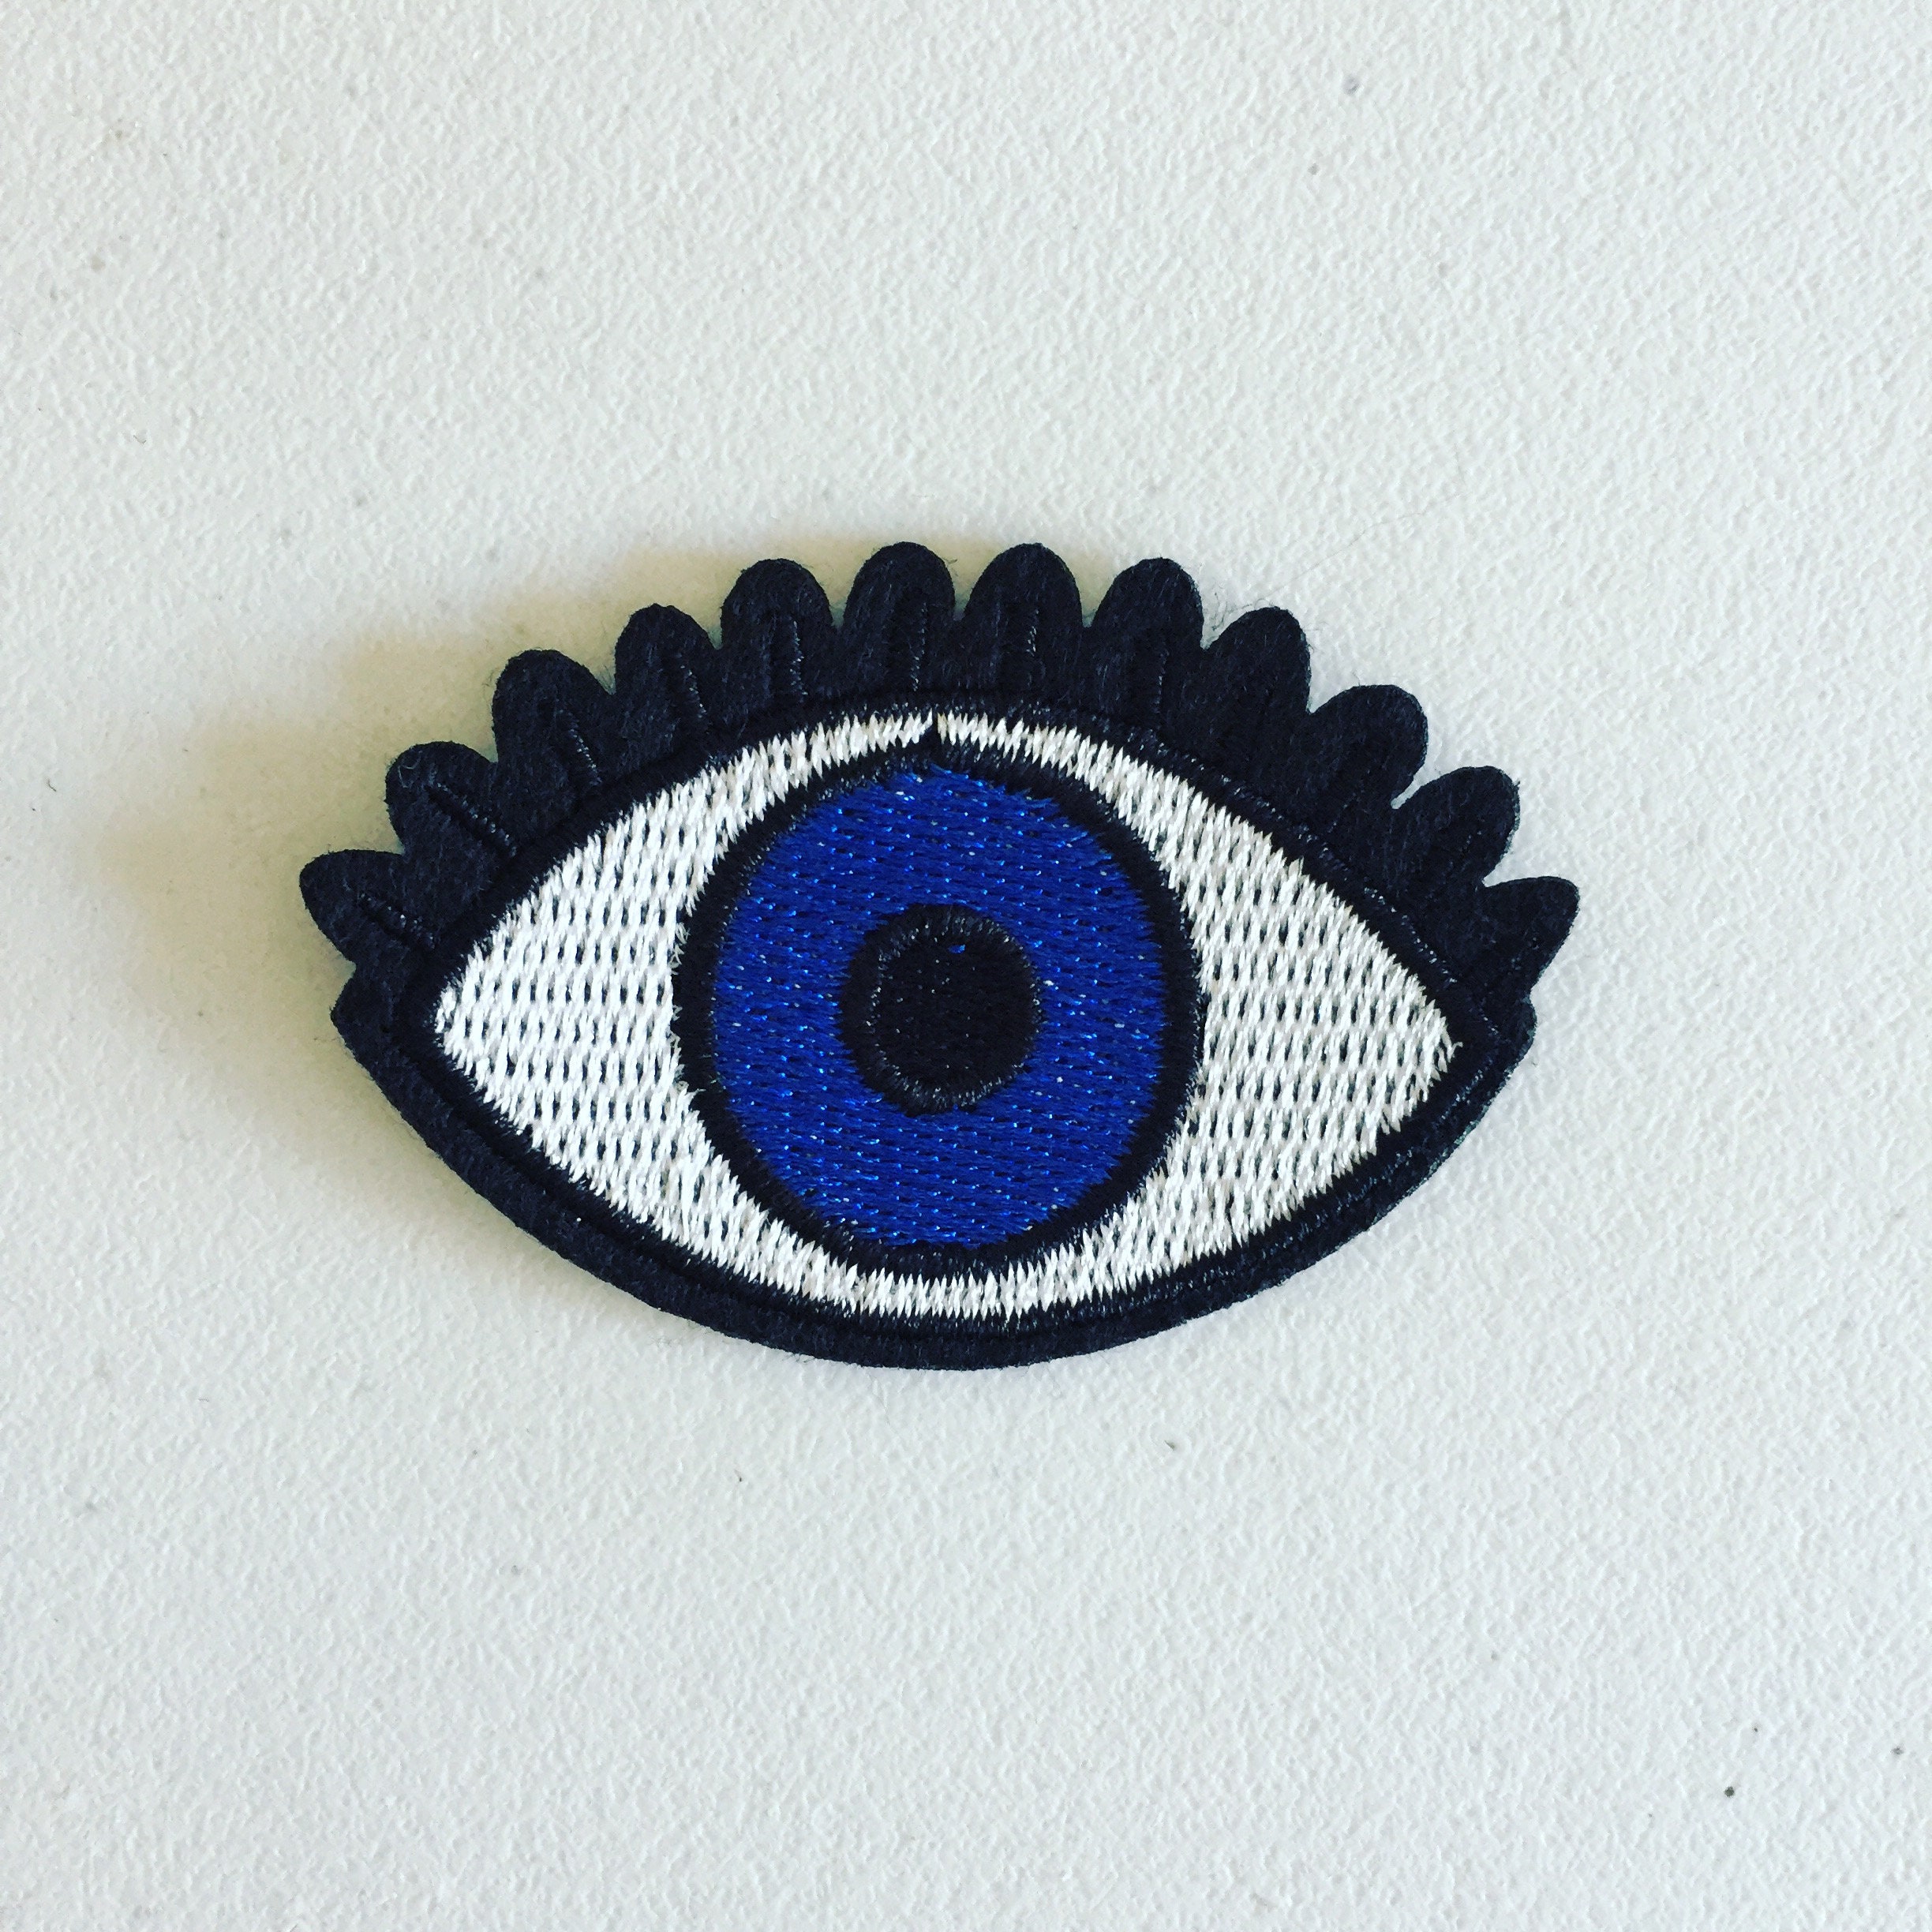 Evil Eye Iron-On Patch, Eyeball Applique Motif, Amulet Decorative Patch,  Third Eye Sew On Patch, DIY Embroidery, Embroidered Applique